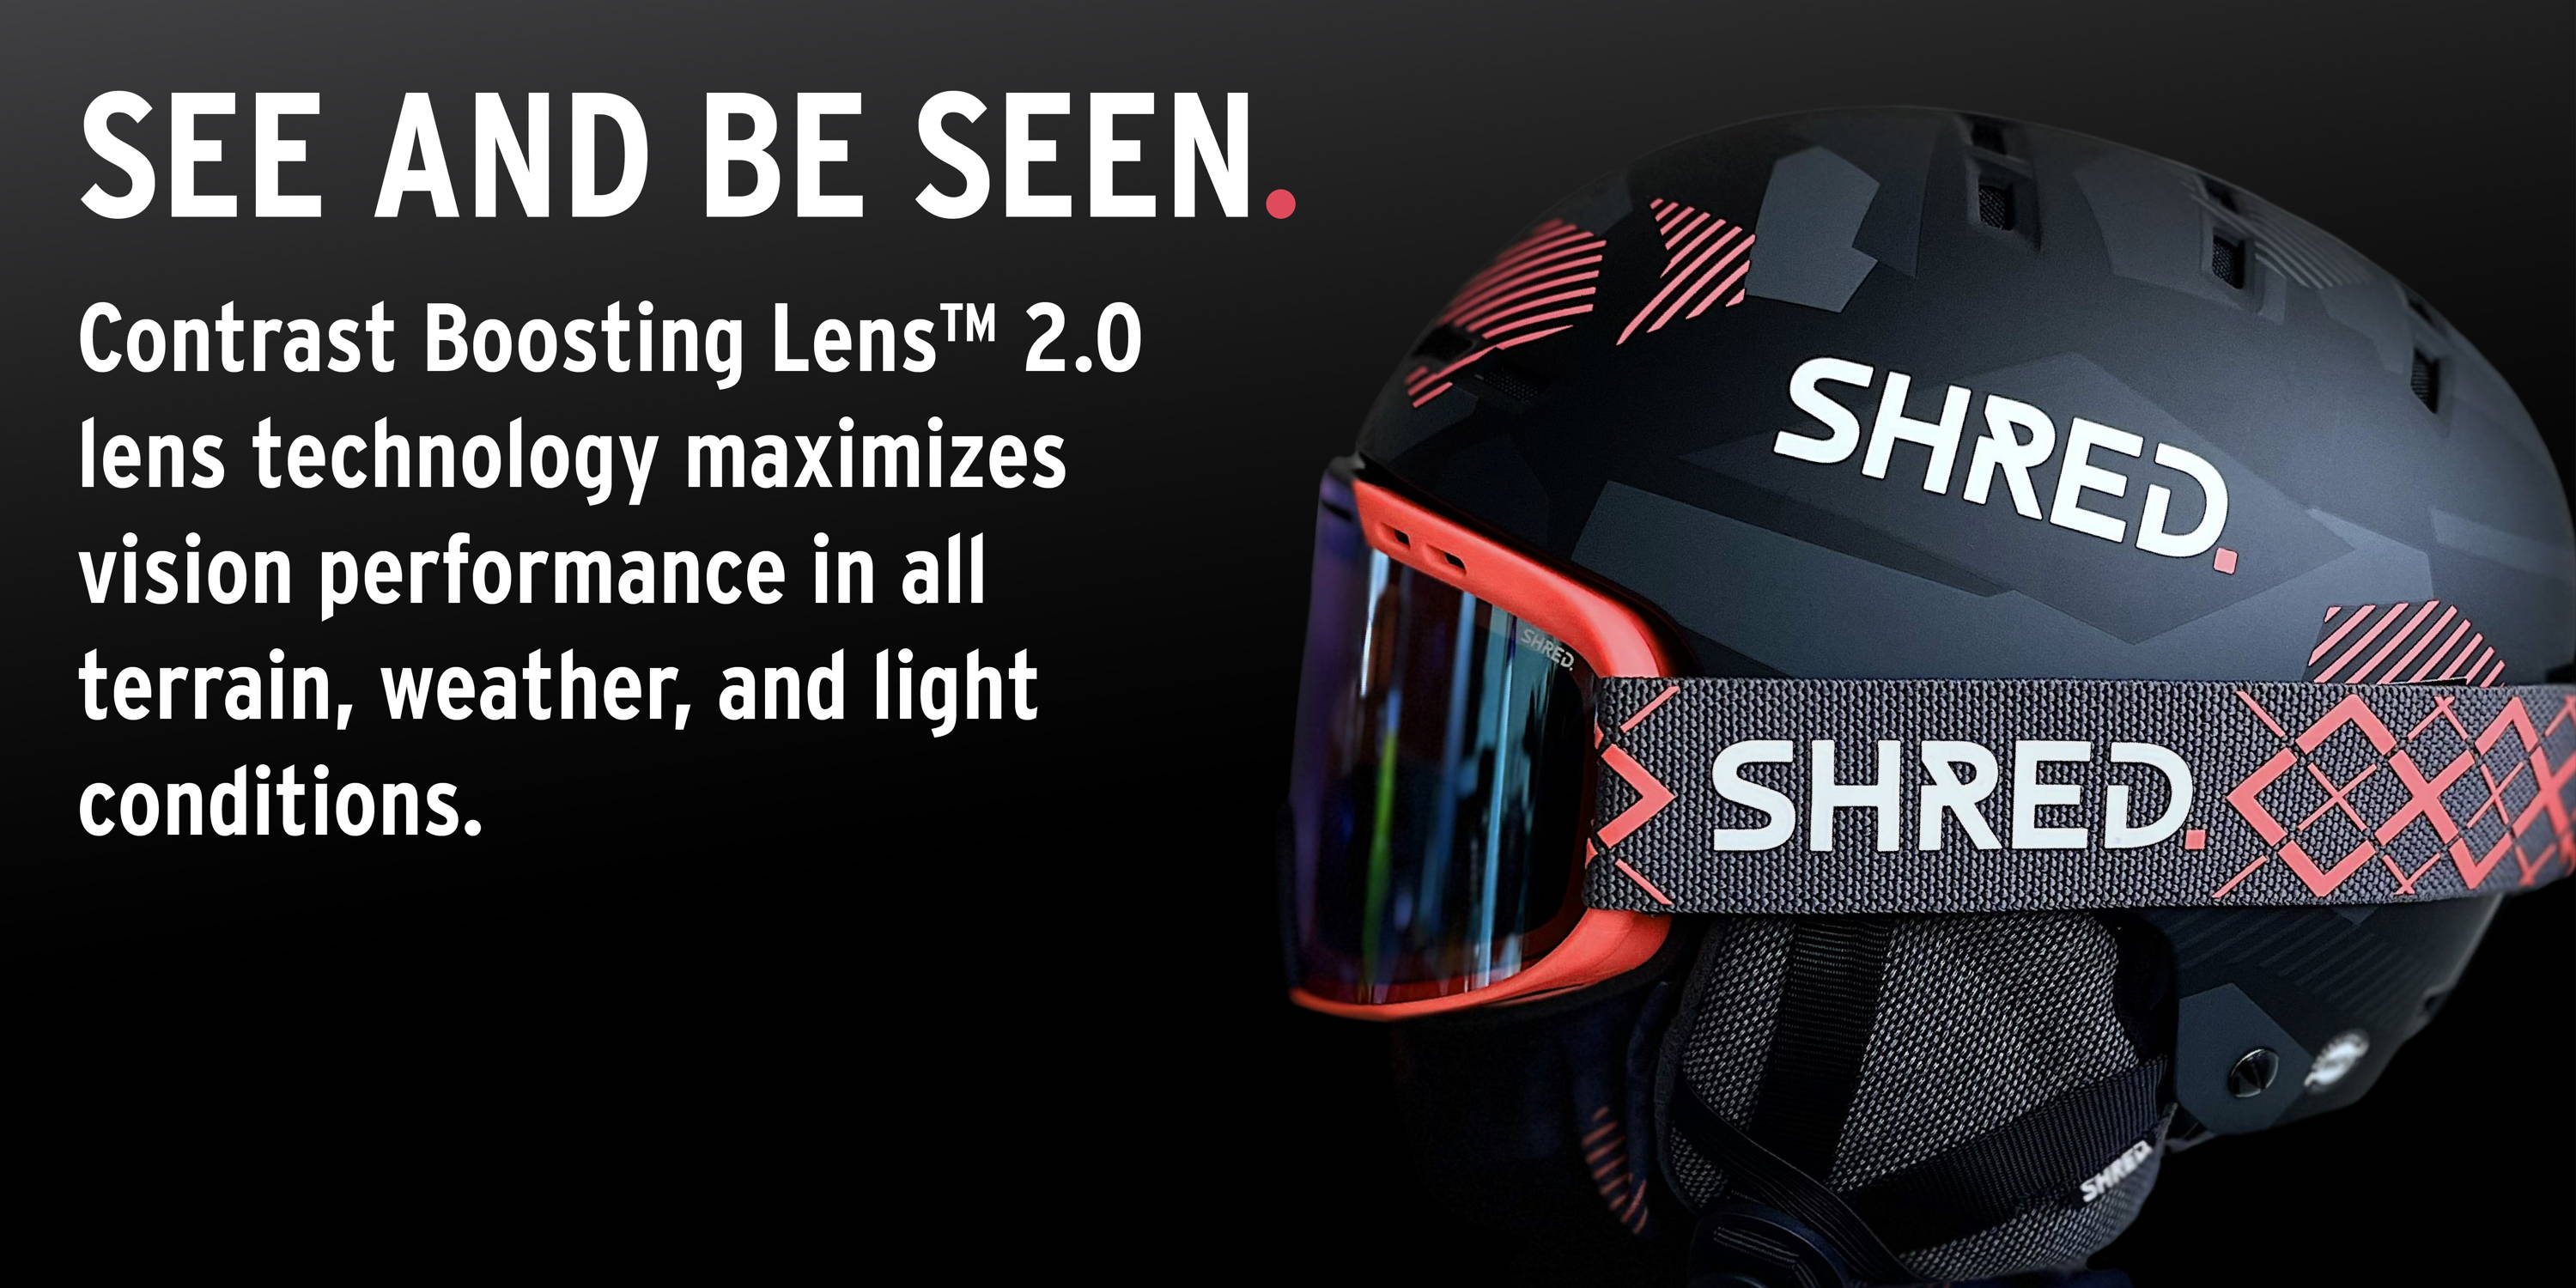 SHRED. BIGSHOW 2022 LINE WITH CONTRAST BOOSTING LENS 2.0 TECHNOLOGY